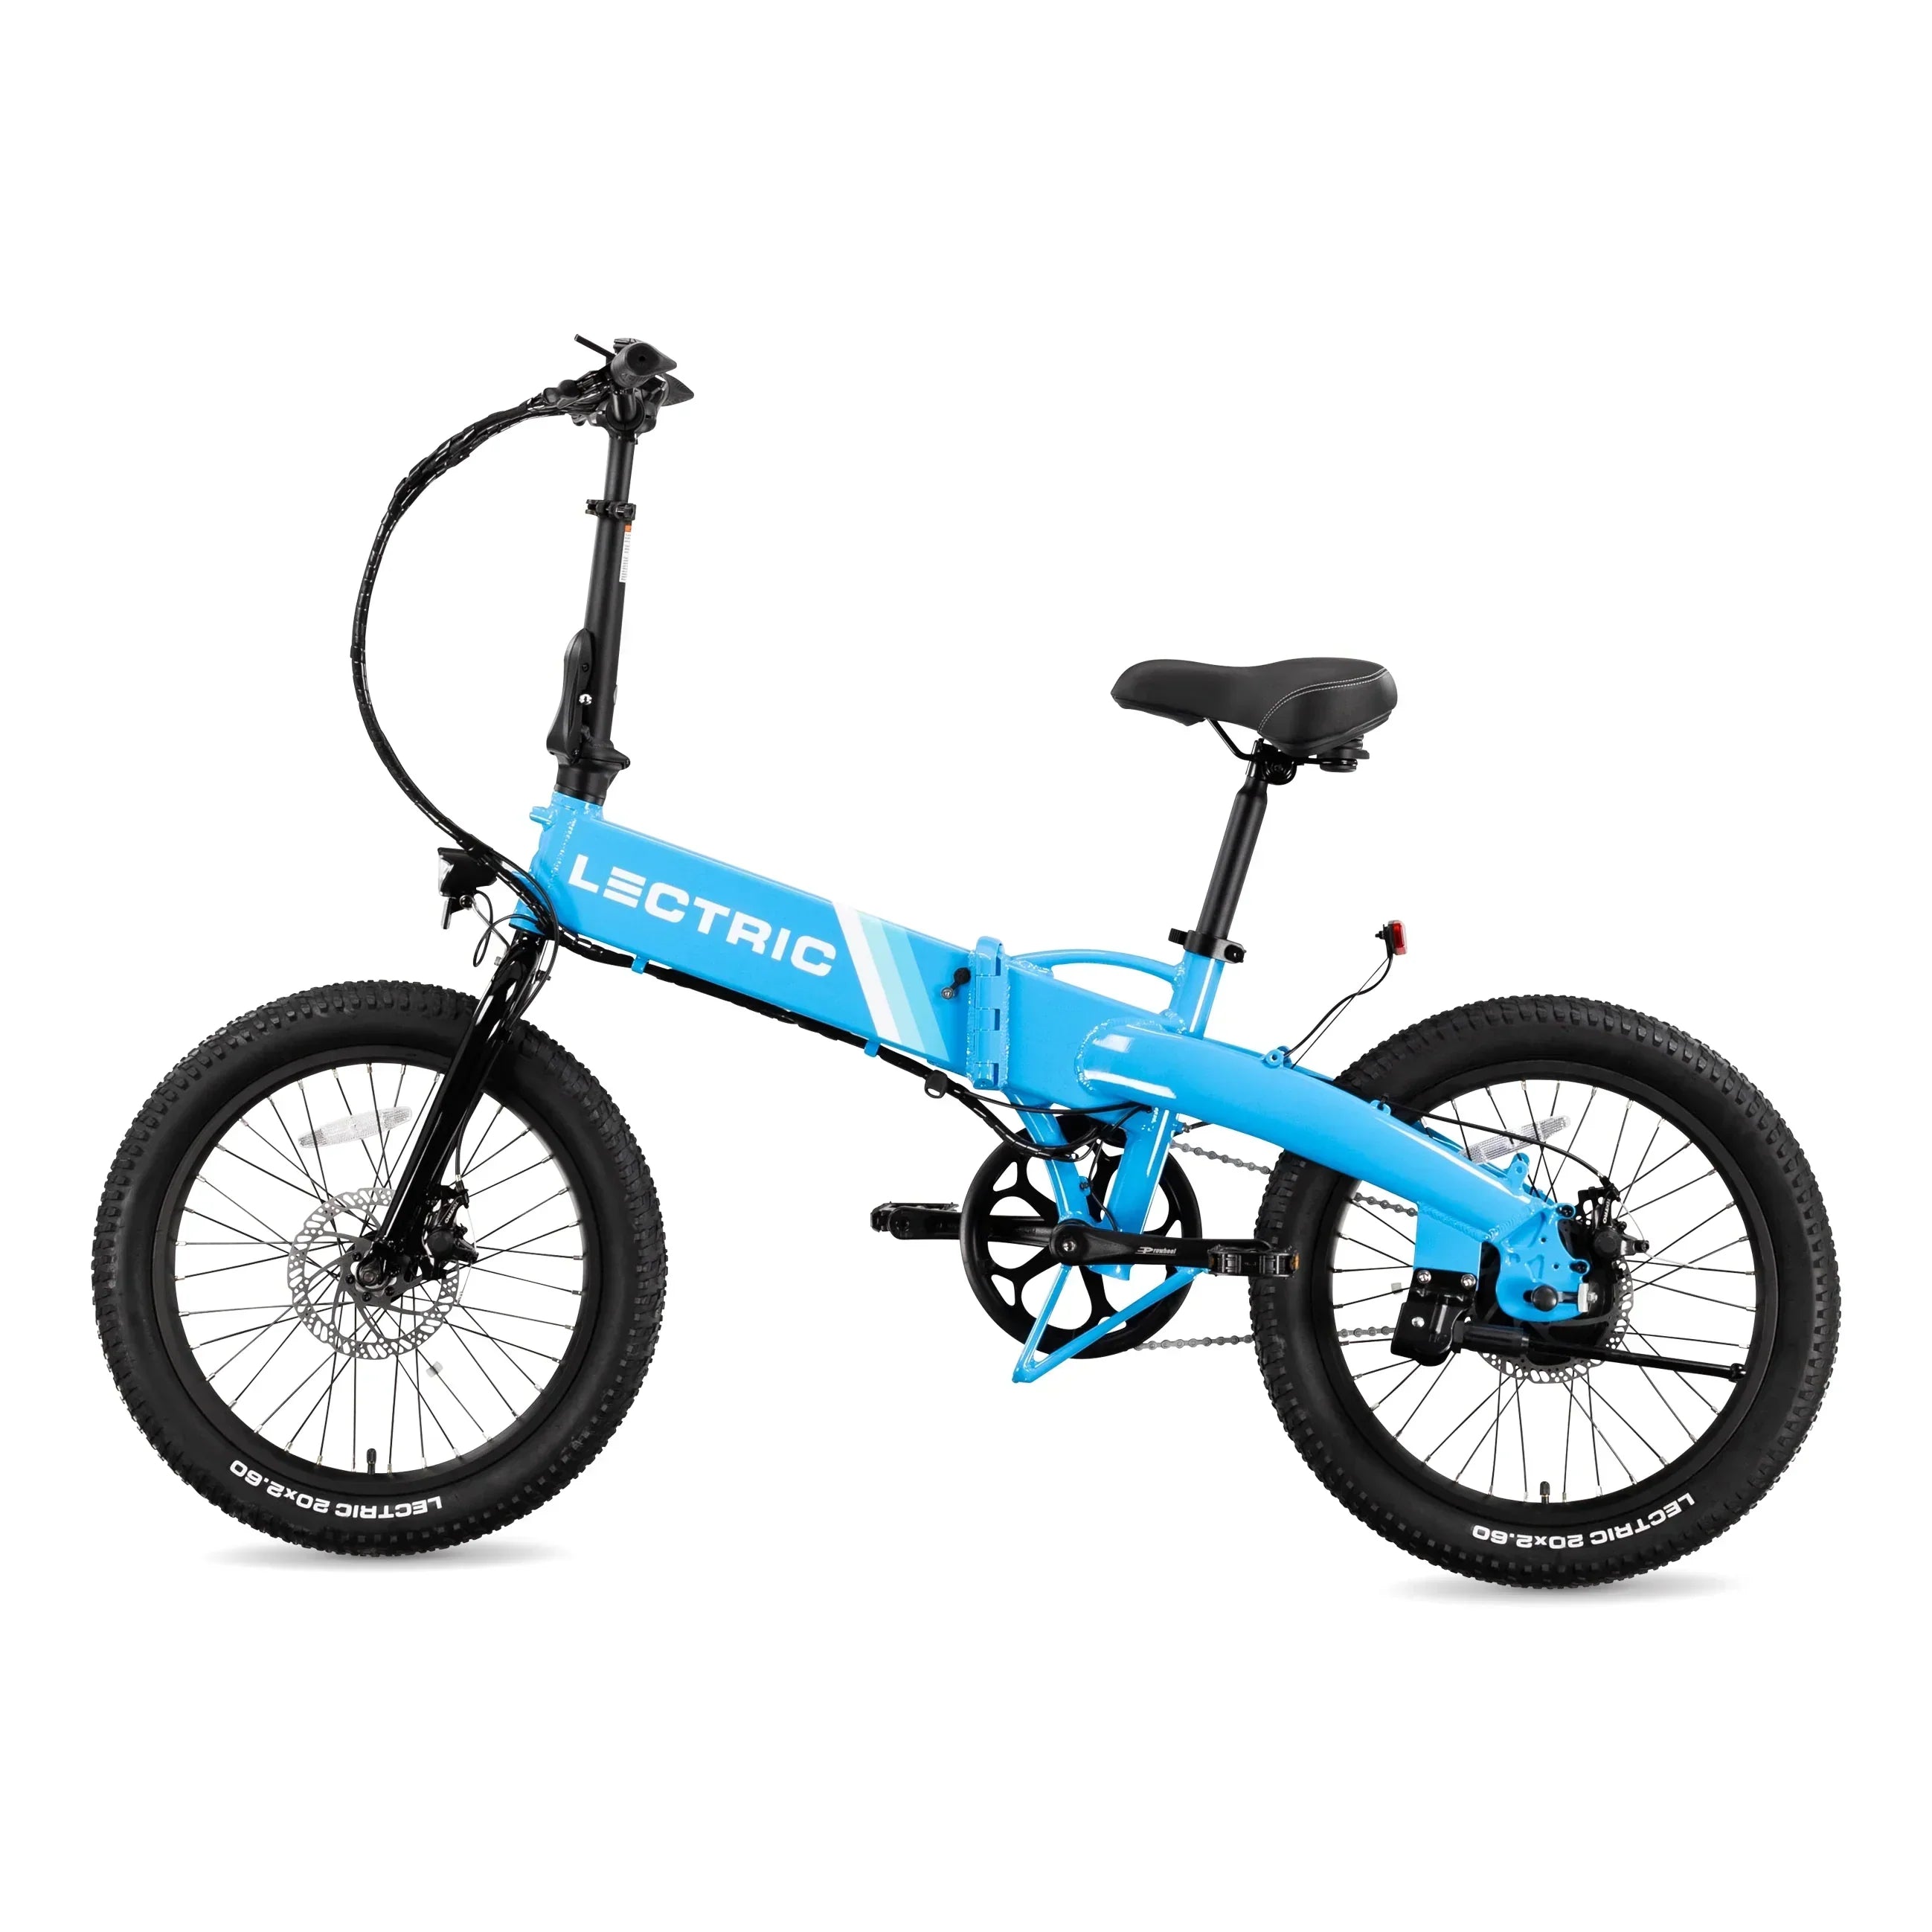 Lectric XP Lite eBike | Adult Folding Electric Bicycle | Best Affordable Lightweight Class 2 Fat Tire Electric Bike in Lectric Blue w/ Pedal Assist